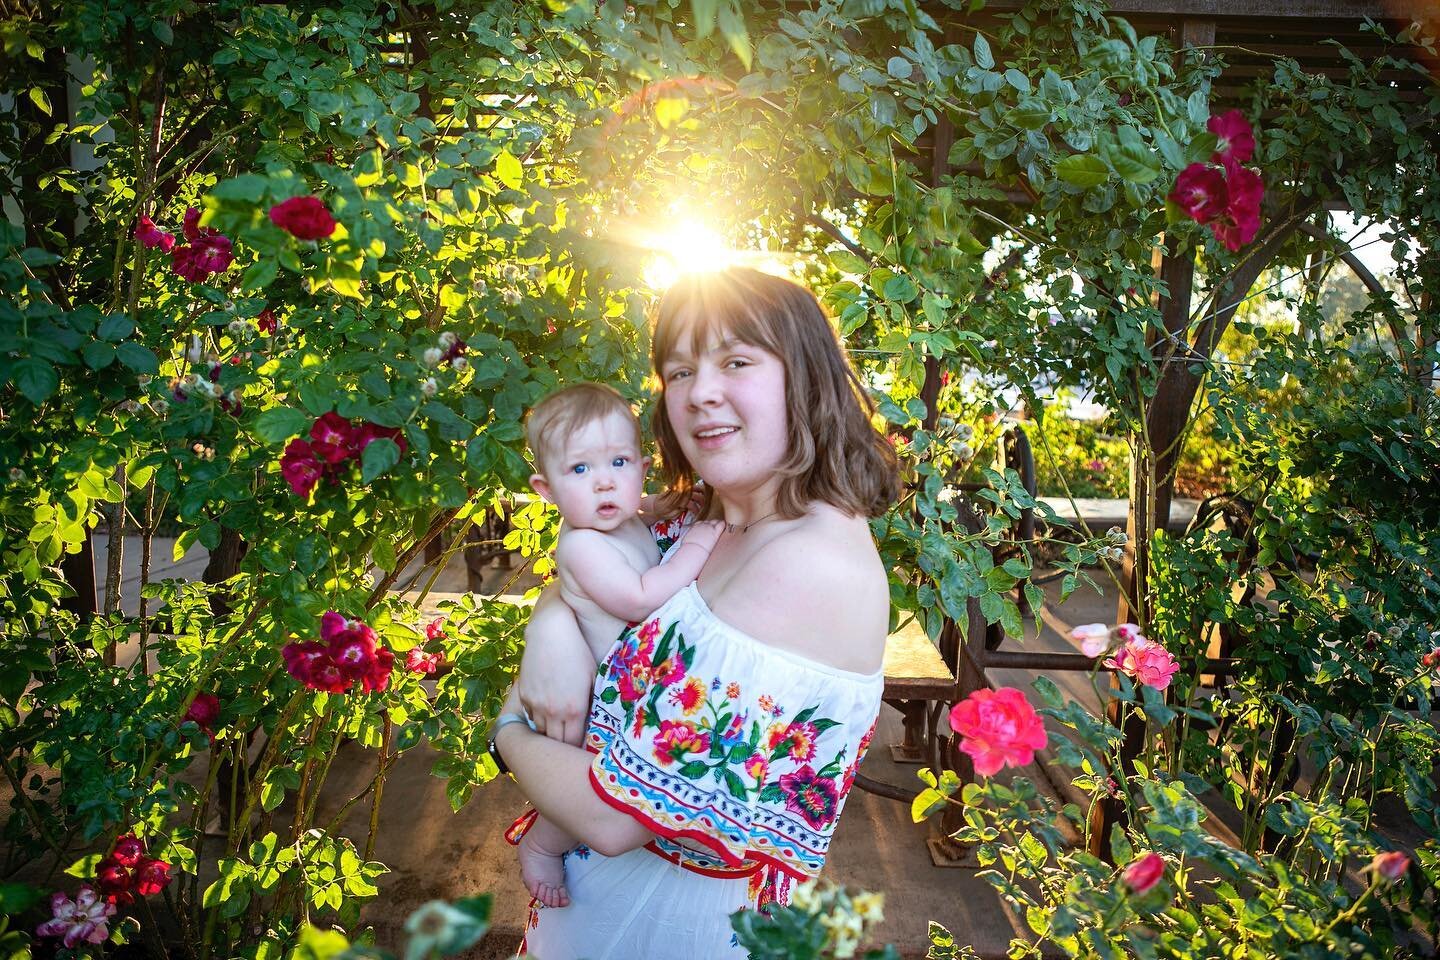 Last night at the Rose Garden with Georgia and Baby C. 🌹🌹🌹

This Wednesday, May 3rd I am doing mini sessions at the Rose Garden. 5:30/6/6:30PM. $200. How many pics? All the good ones. DM to request to book.